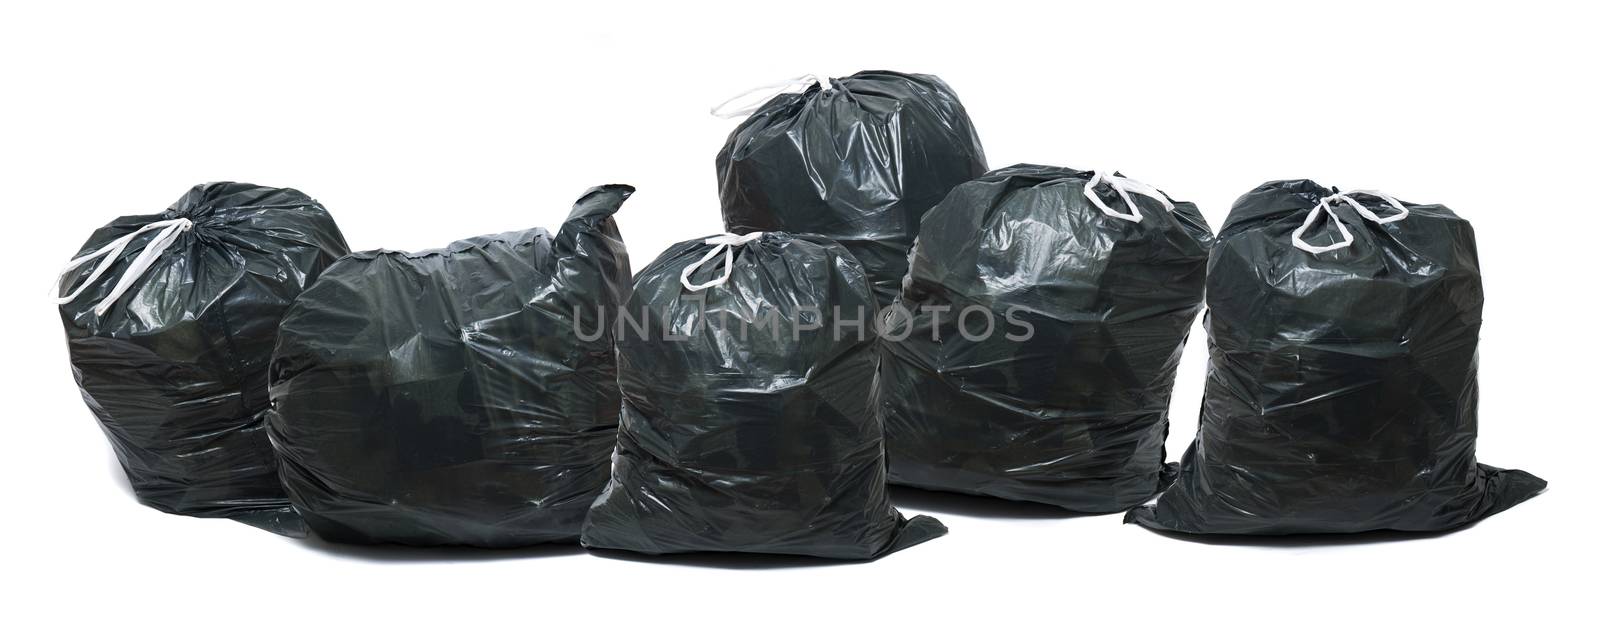 Group of green trash bags by membio